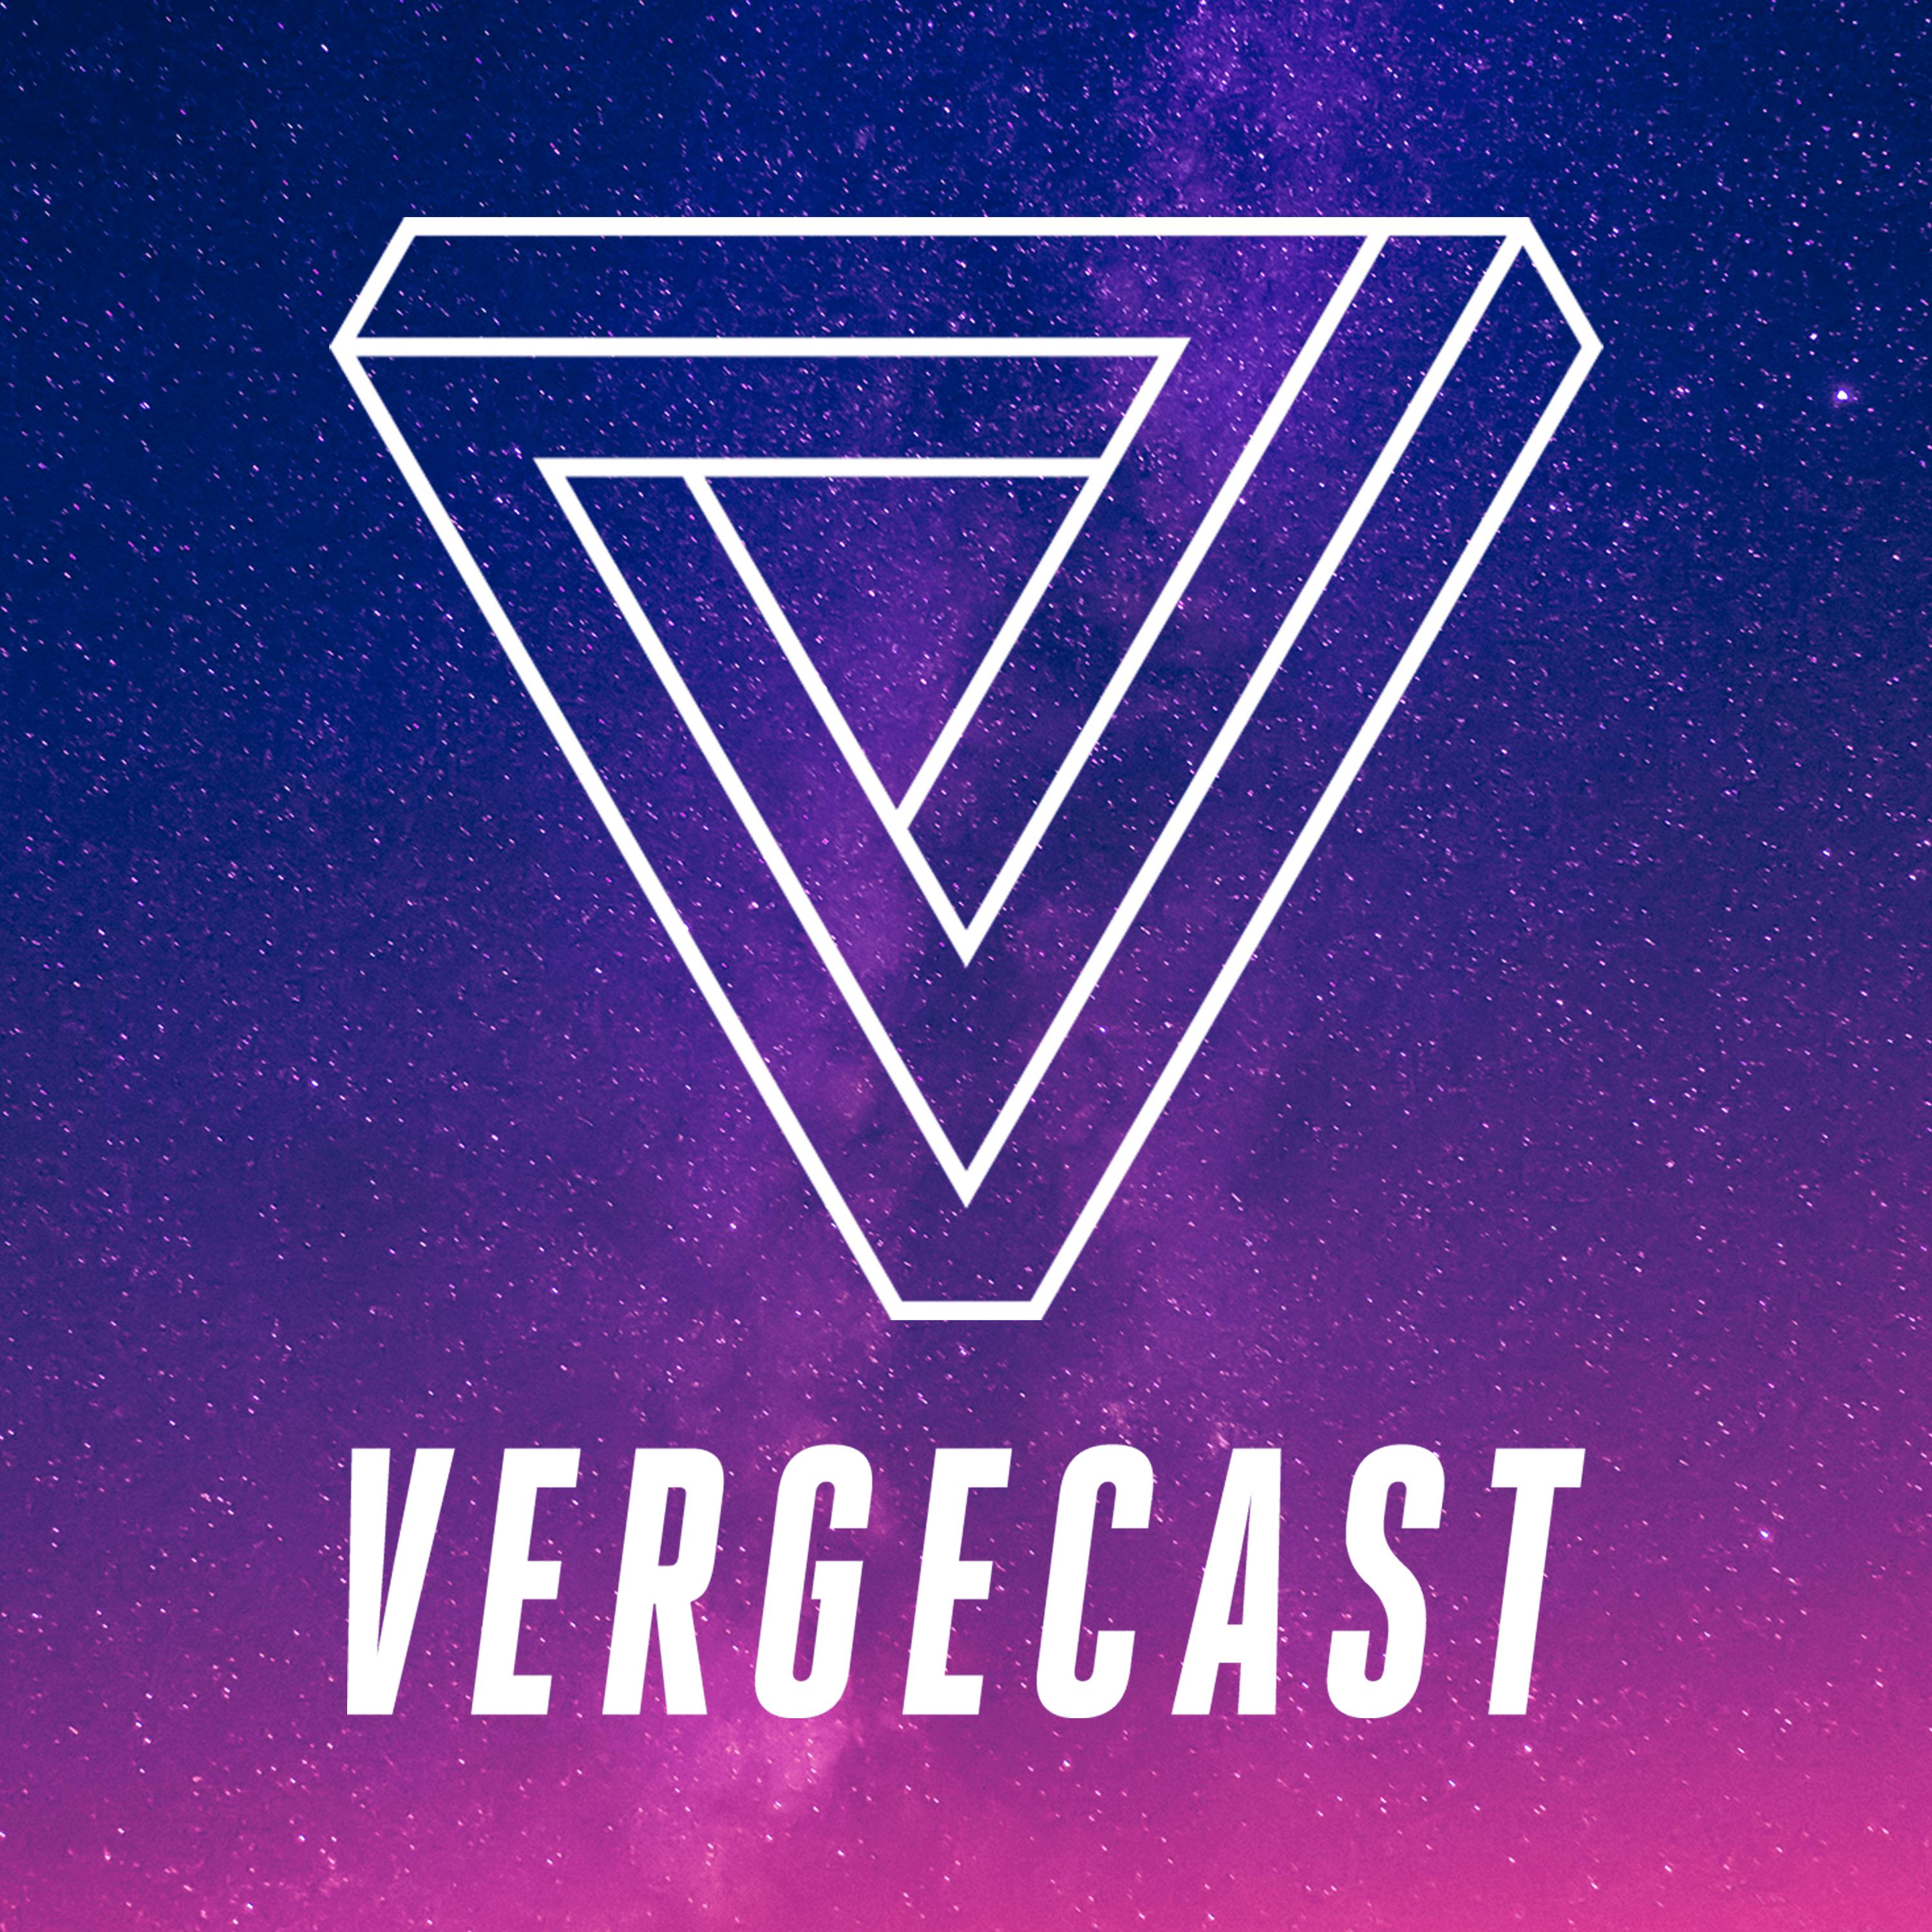 The Vergecast Podcast Addict - roblox change angle of player walking gravity